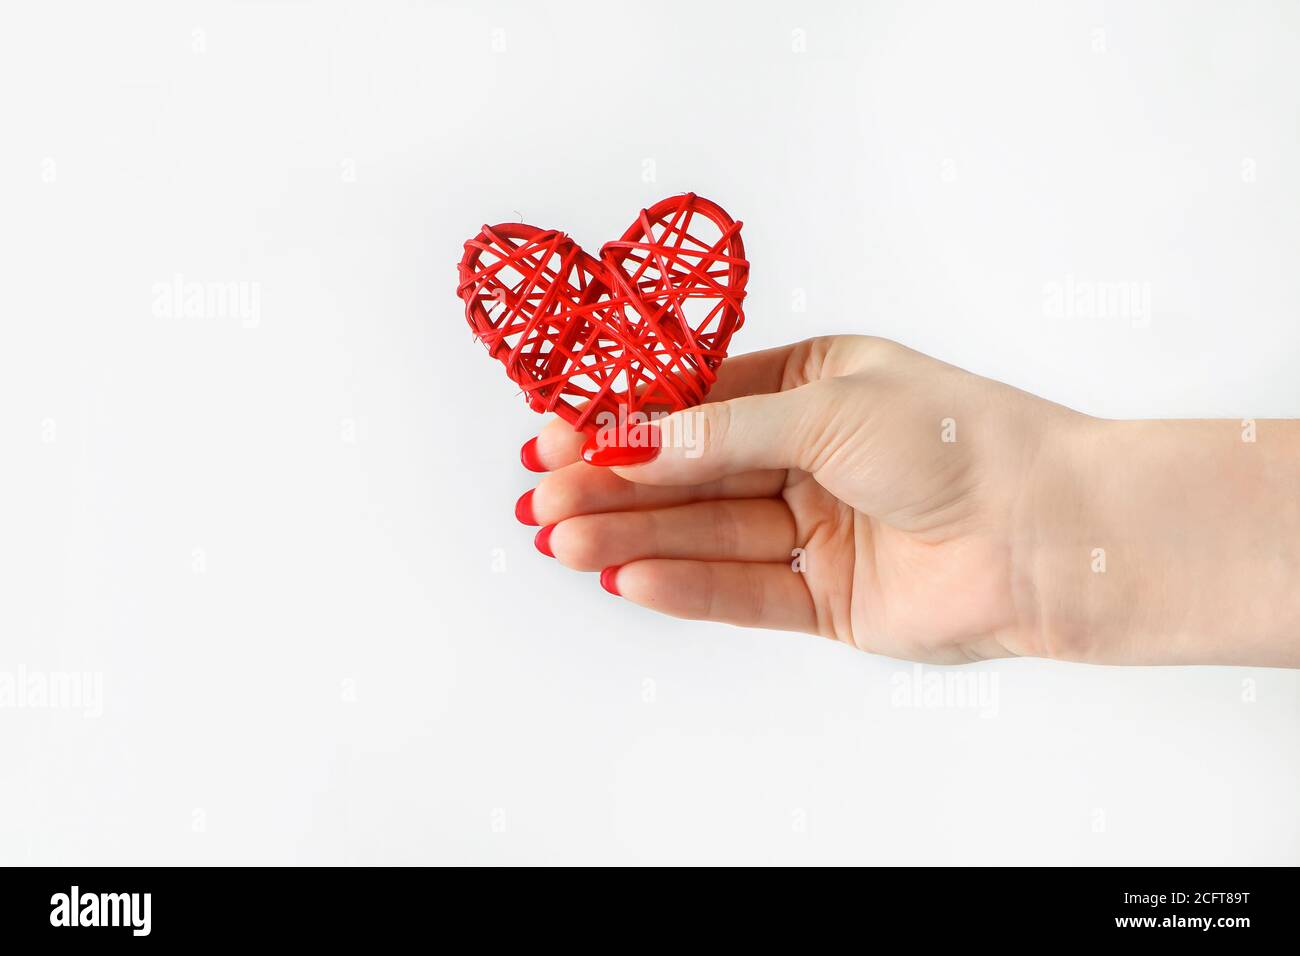 Red heart in his outstretched hand on a white background. A hand holds out a heart. Symbol of cardiology and medicine. Health concept. Stock Photo